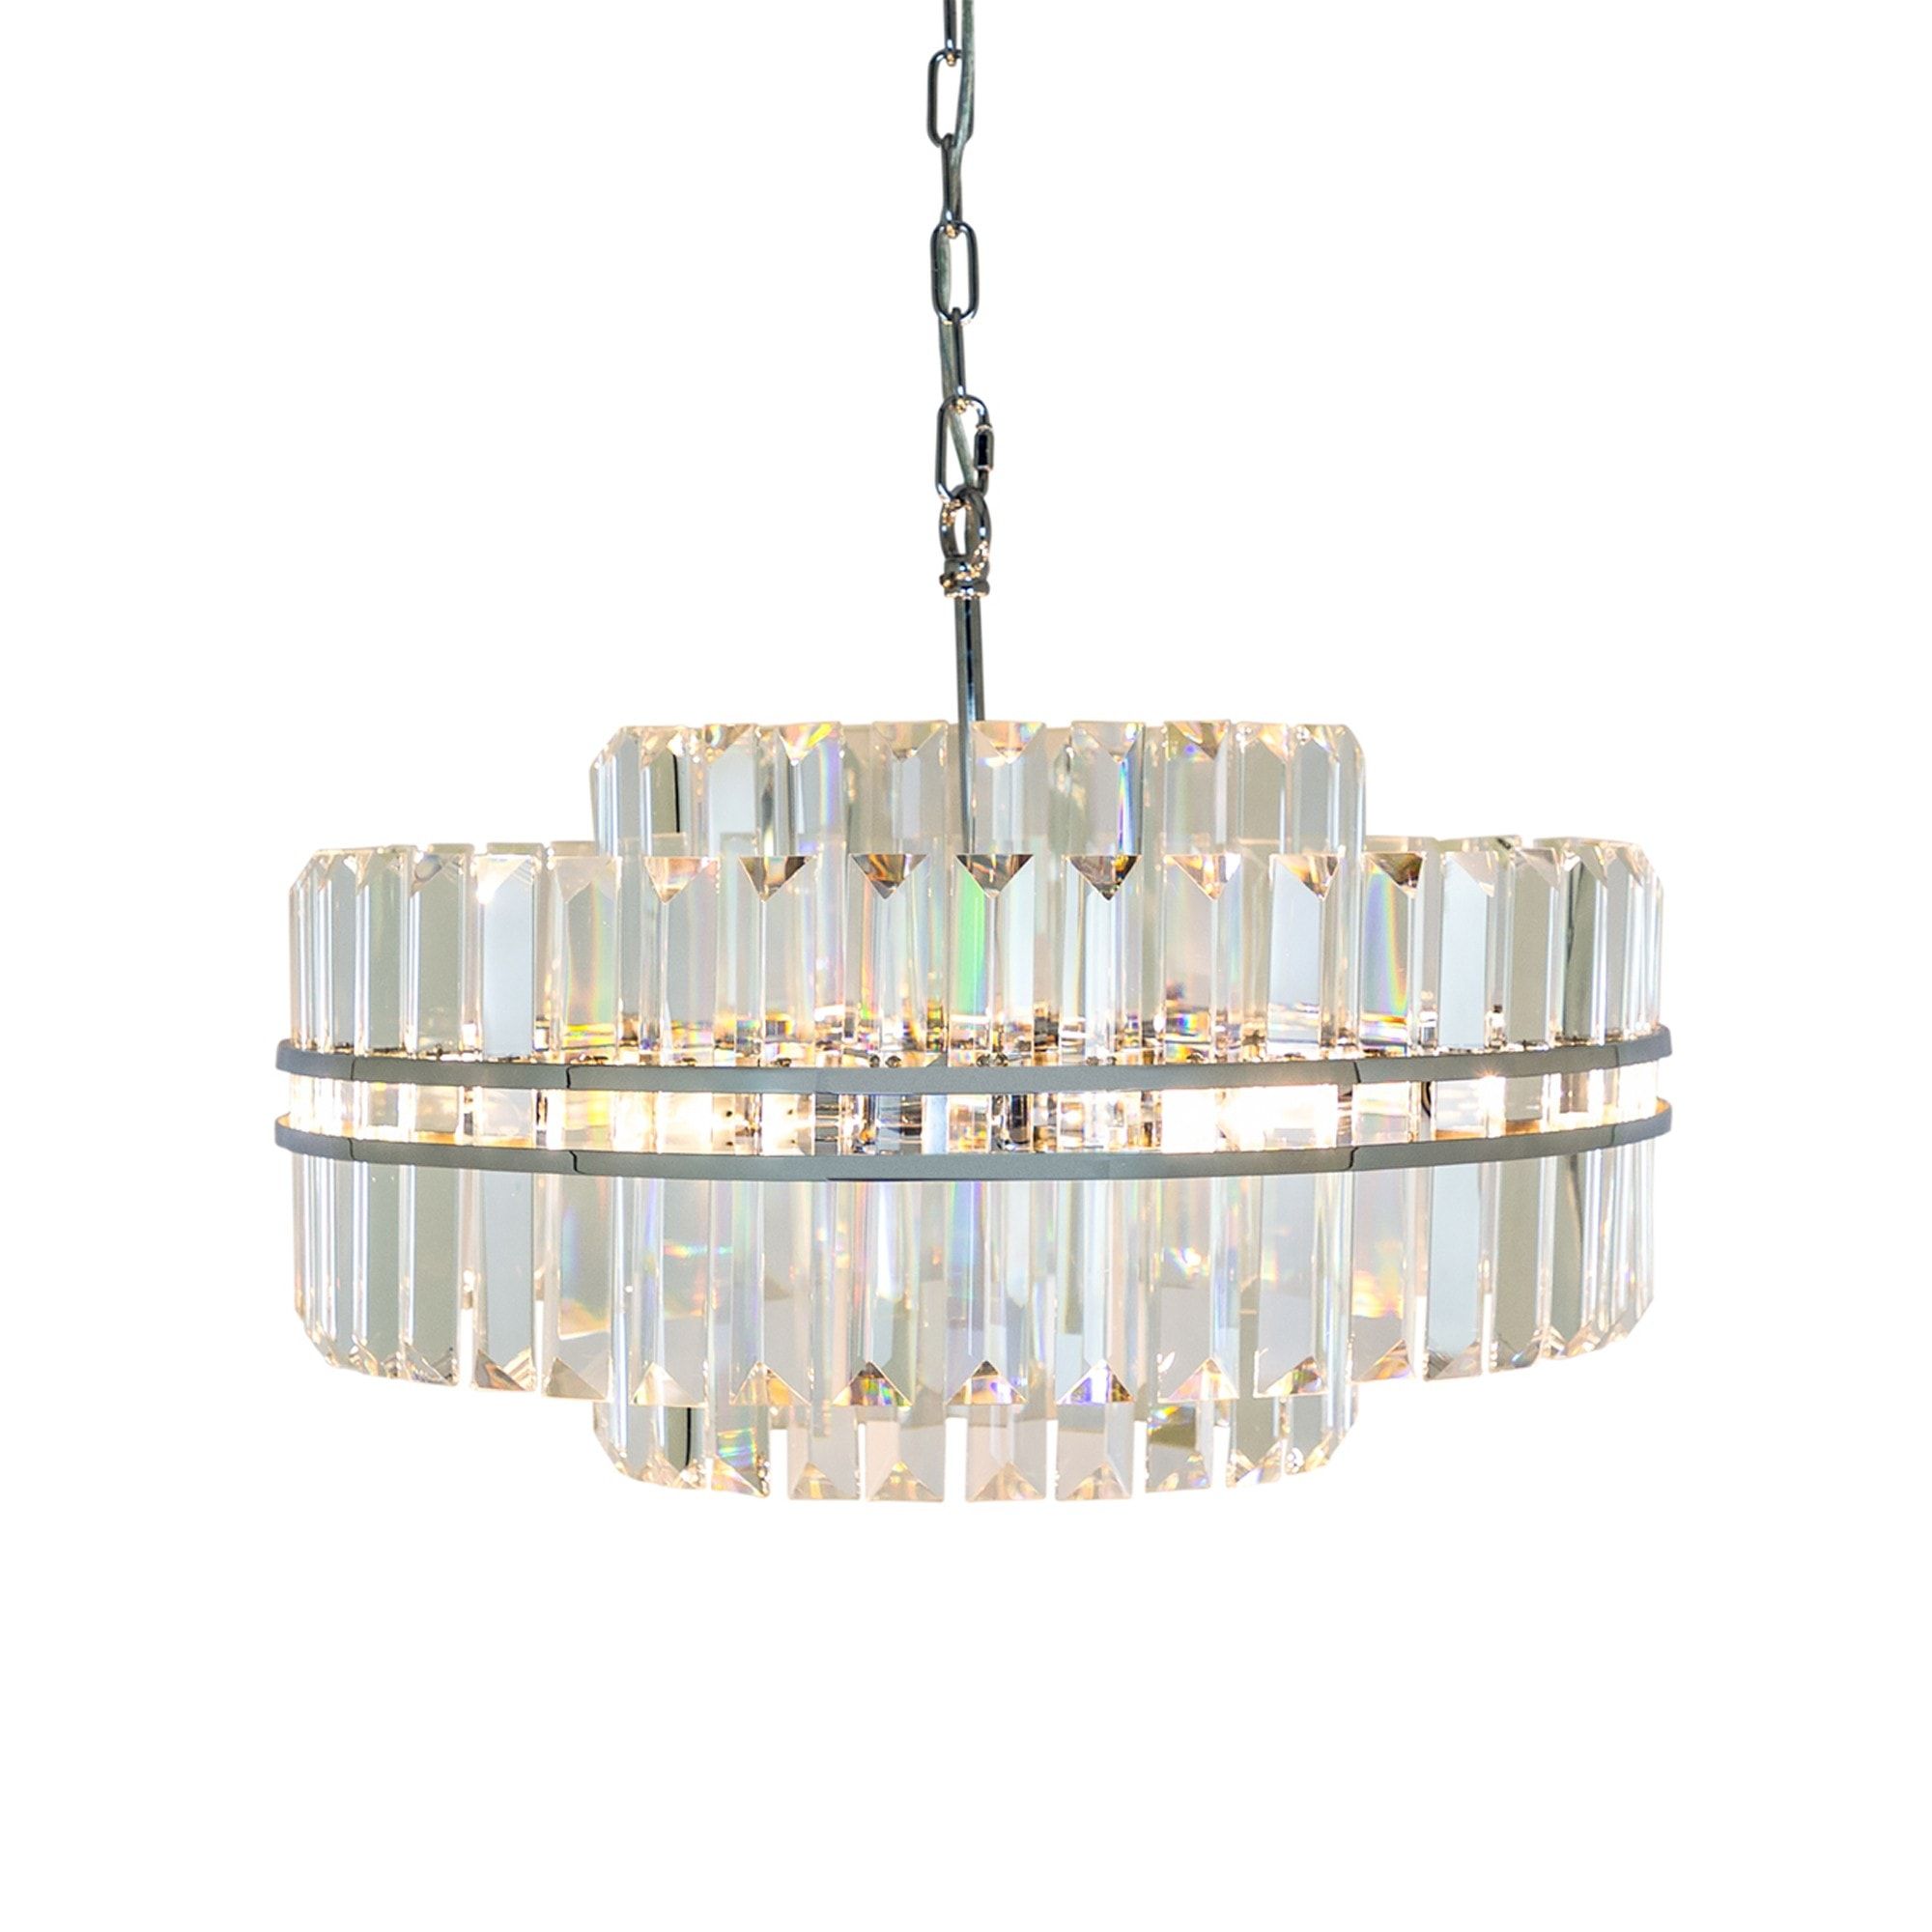 Chrome Chandelier | Contemporary Lighting | Contemporary With Glass And Chrome Modern Chandeliers (View 10 of 15)